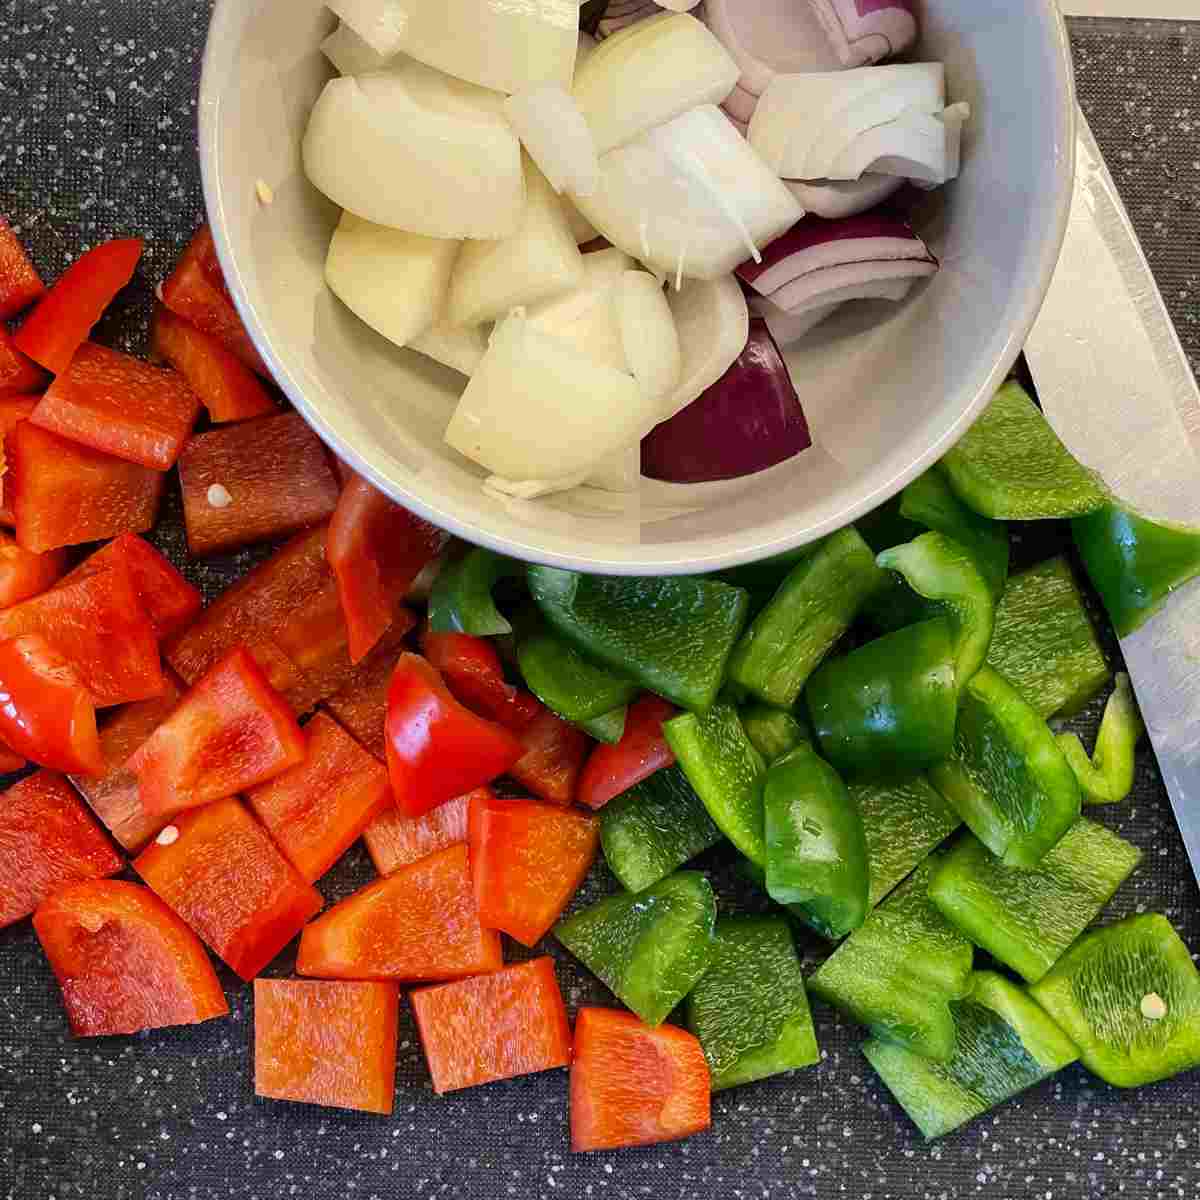 Chop onion green and red peppers